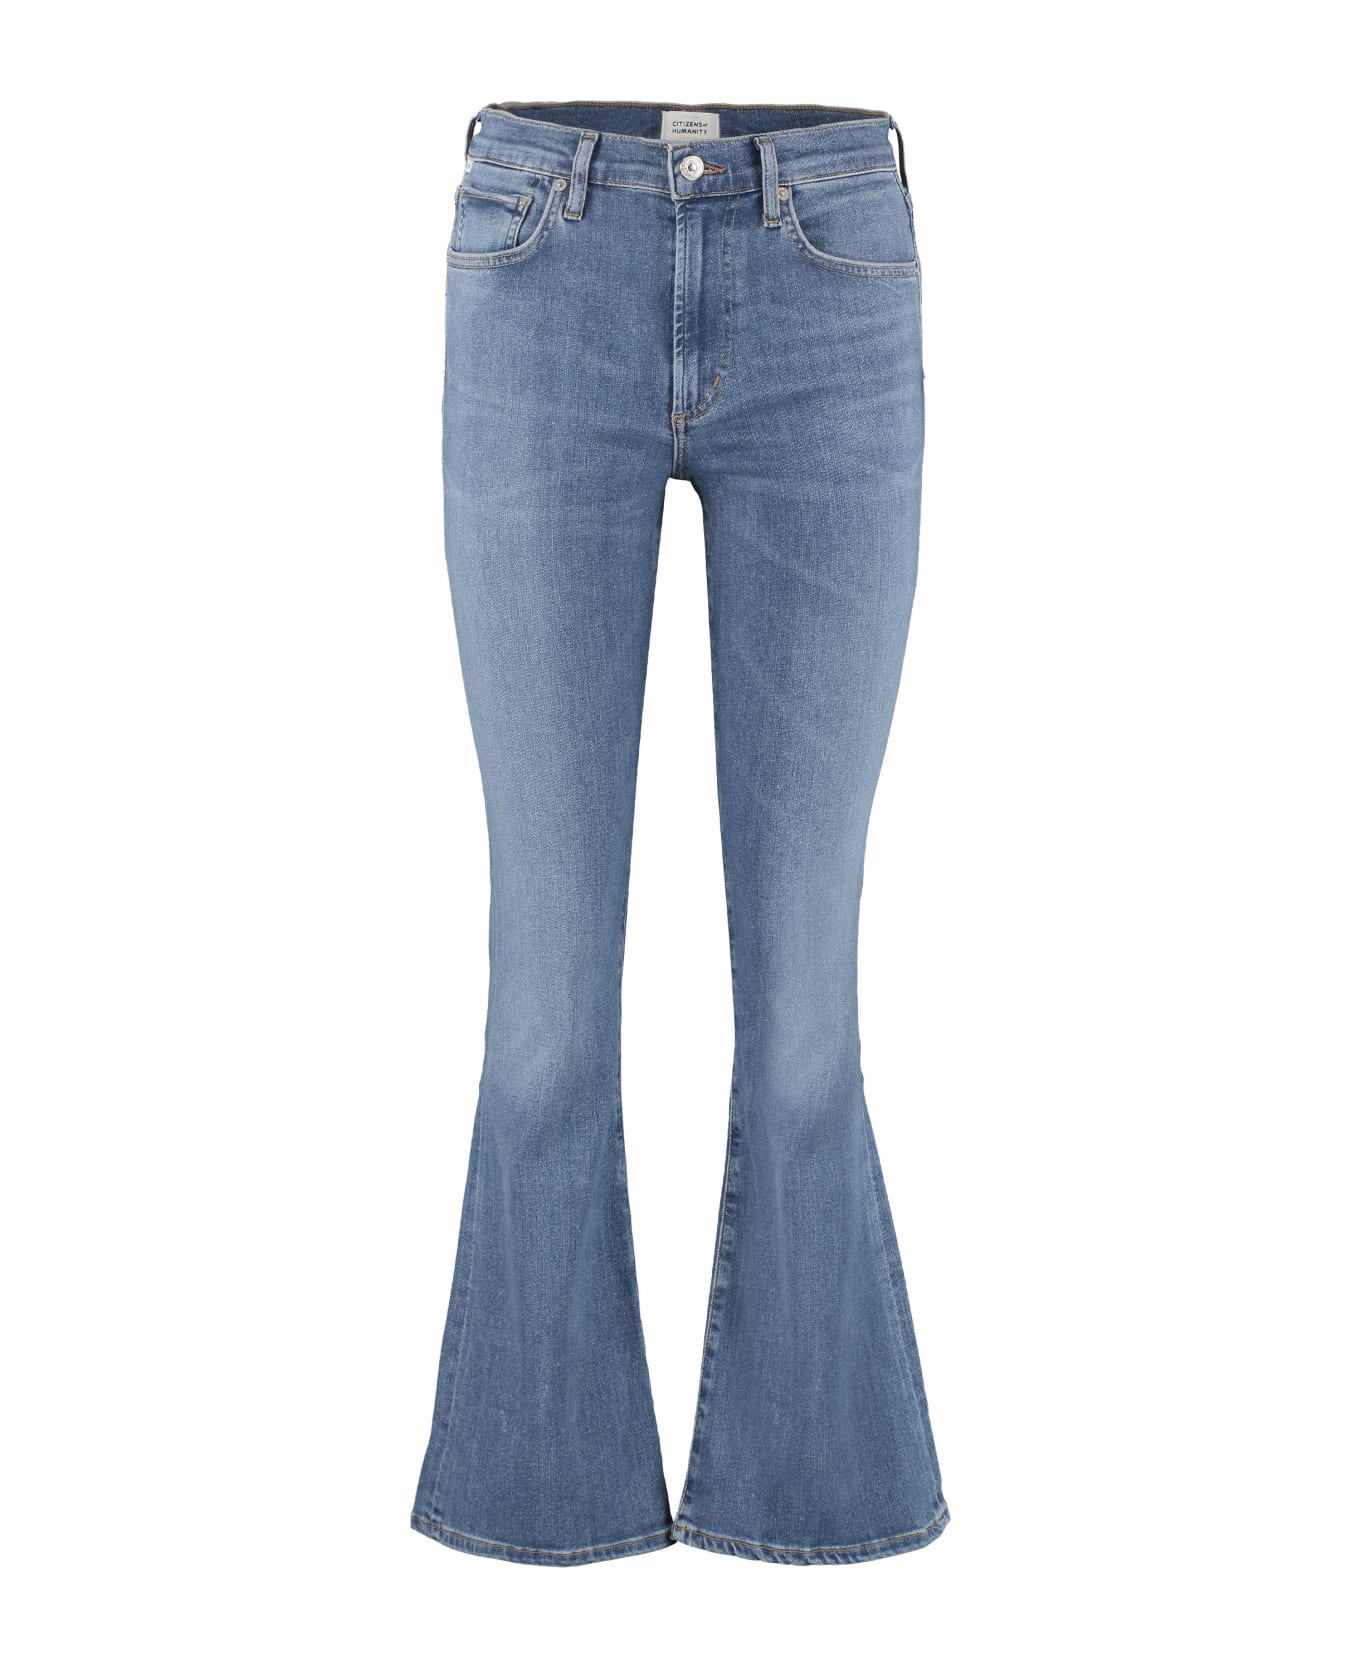 Citizens of Humanity Emannuelle Flared-slim Jeans - Denim